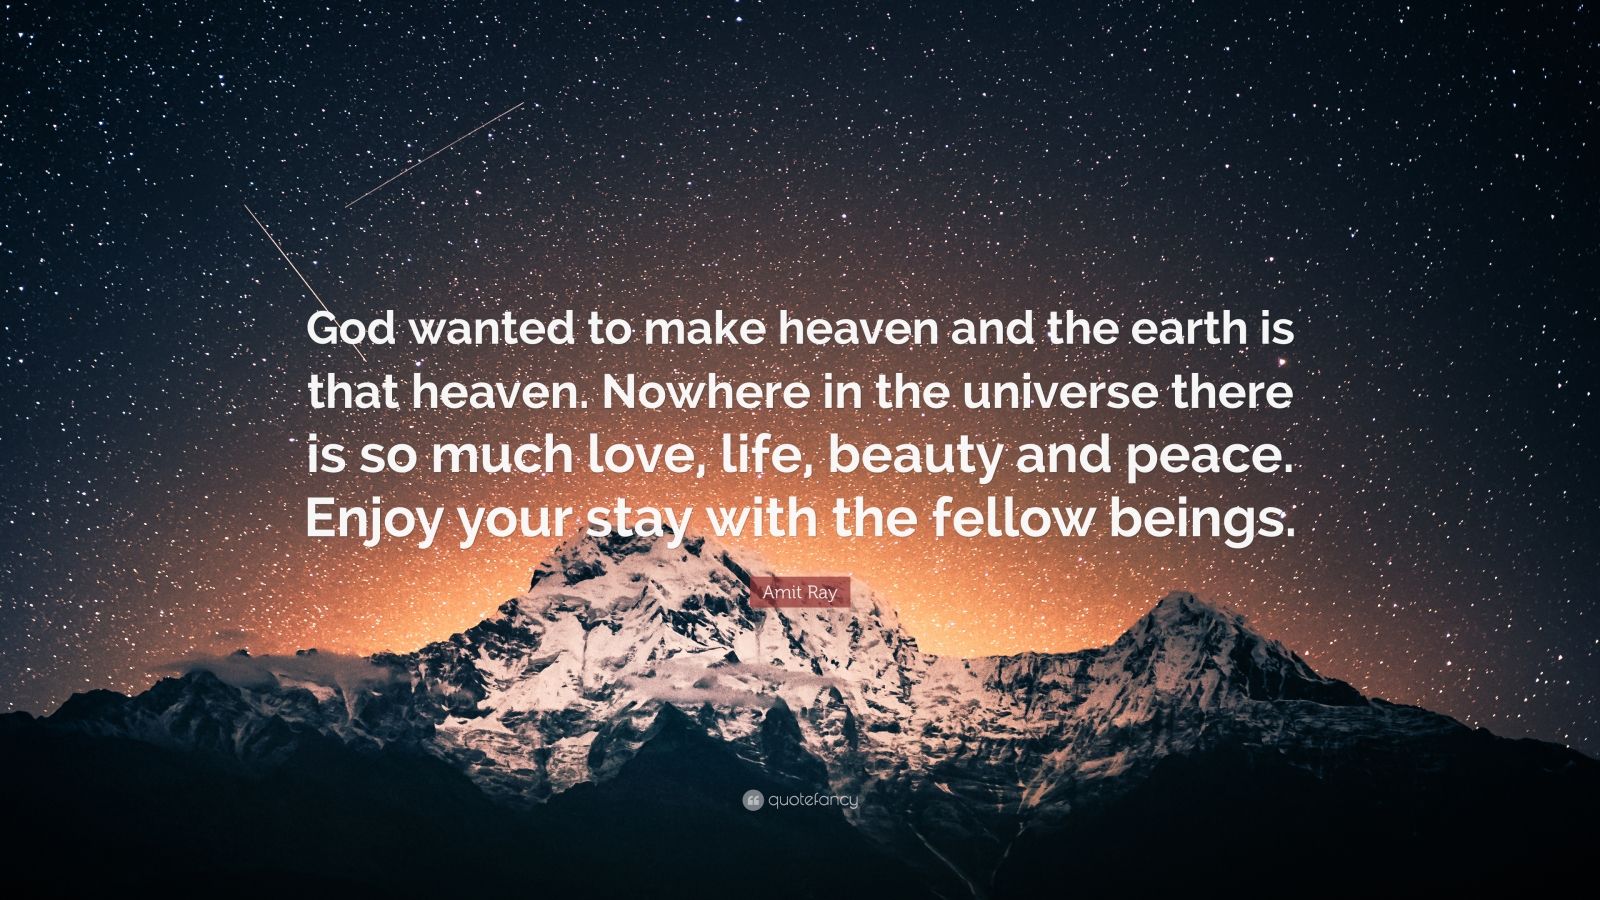 Amit Ray Quote: “God wanted to make heaven and the earth is that heaven ...